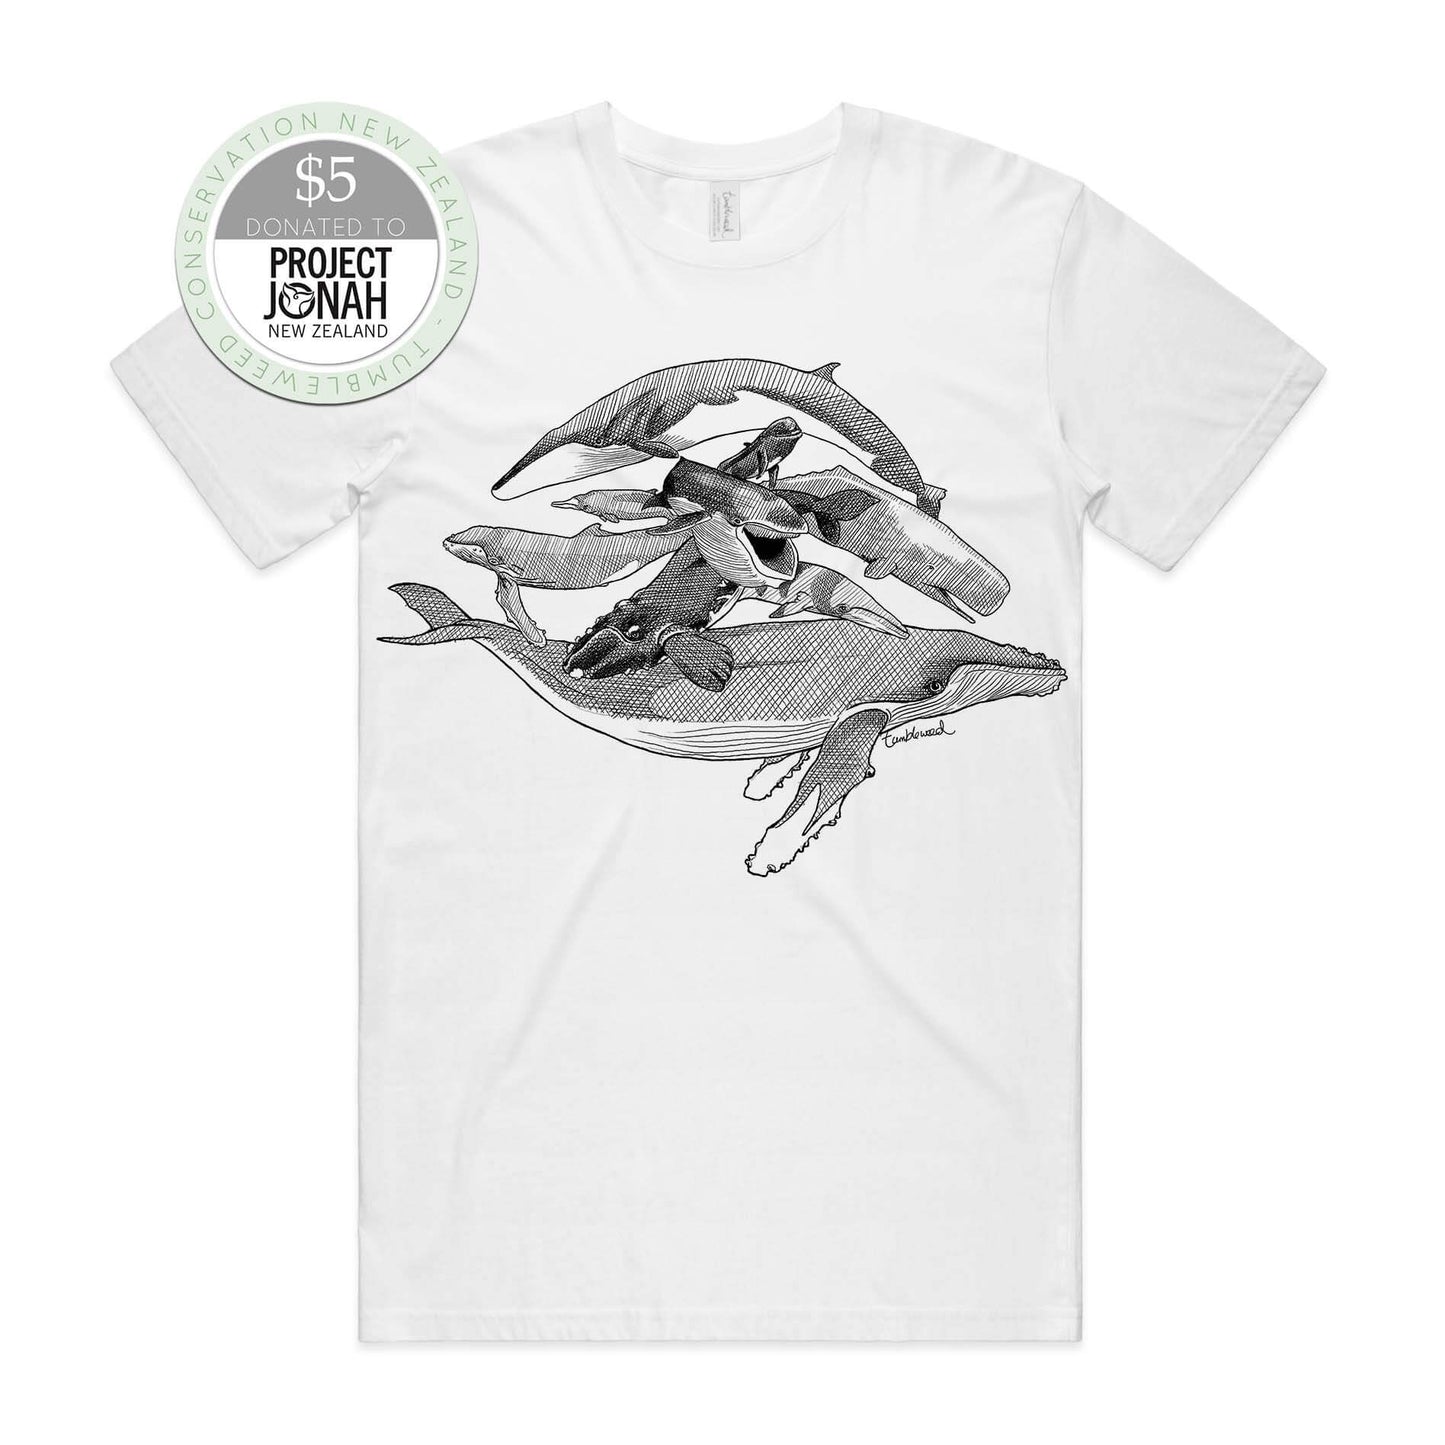 White, male t-shirt featuring a screen printed Whales design.